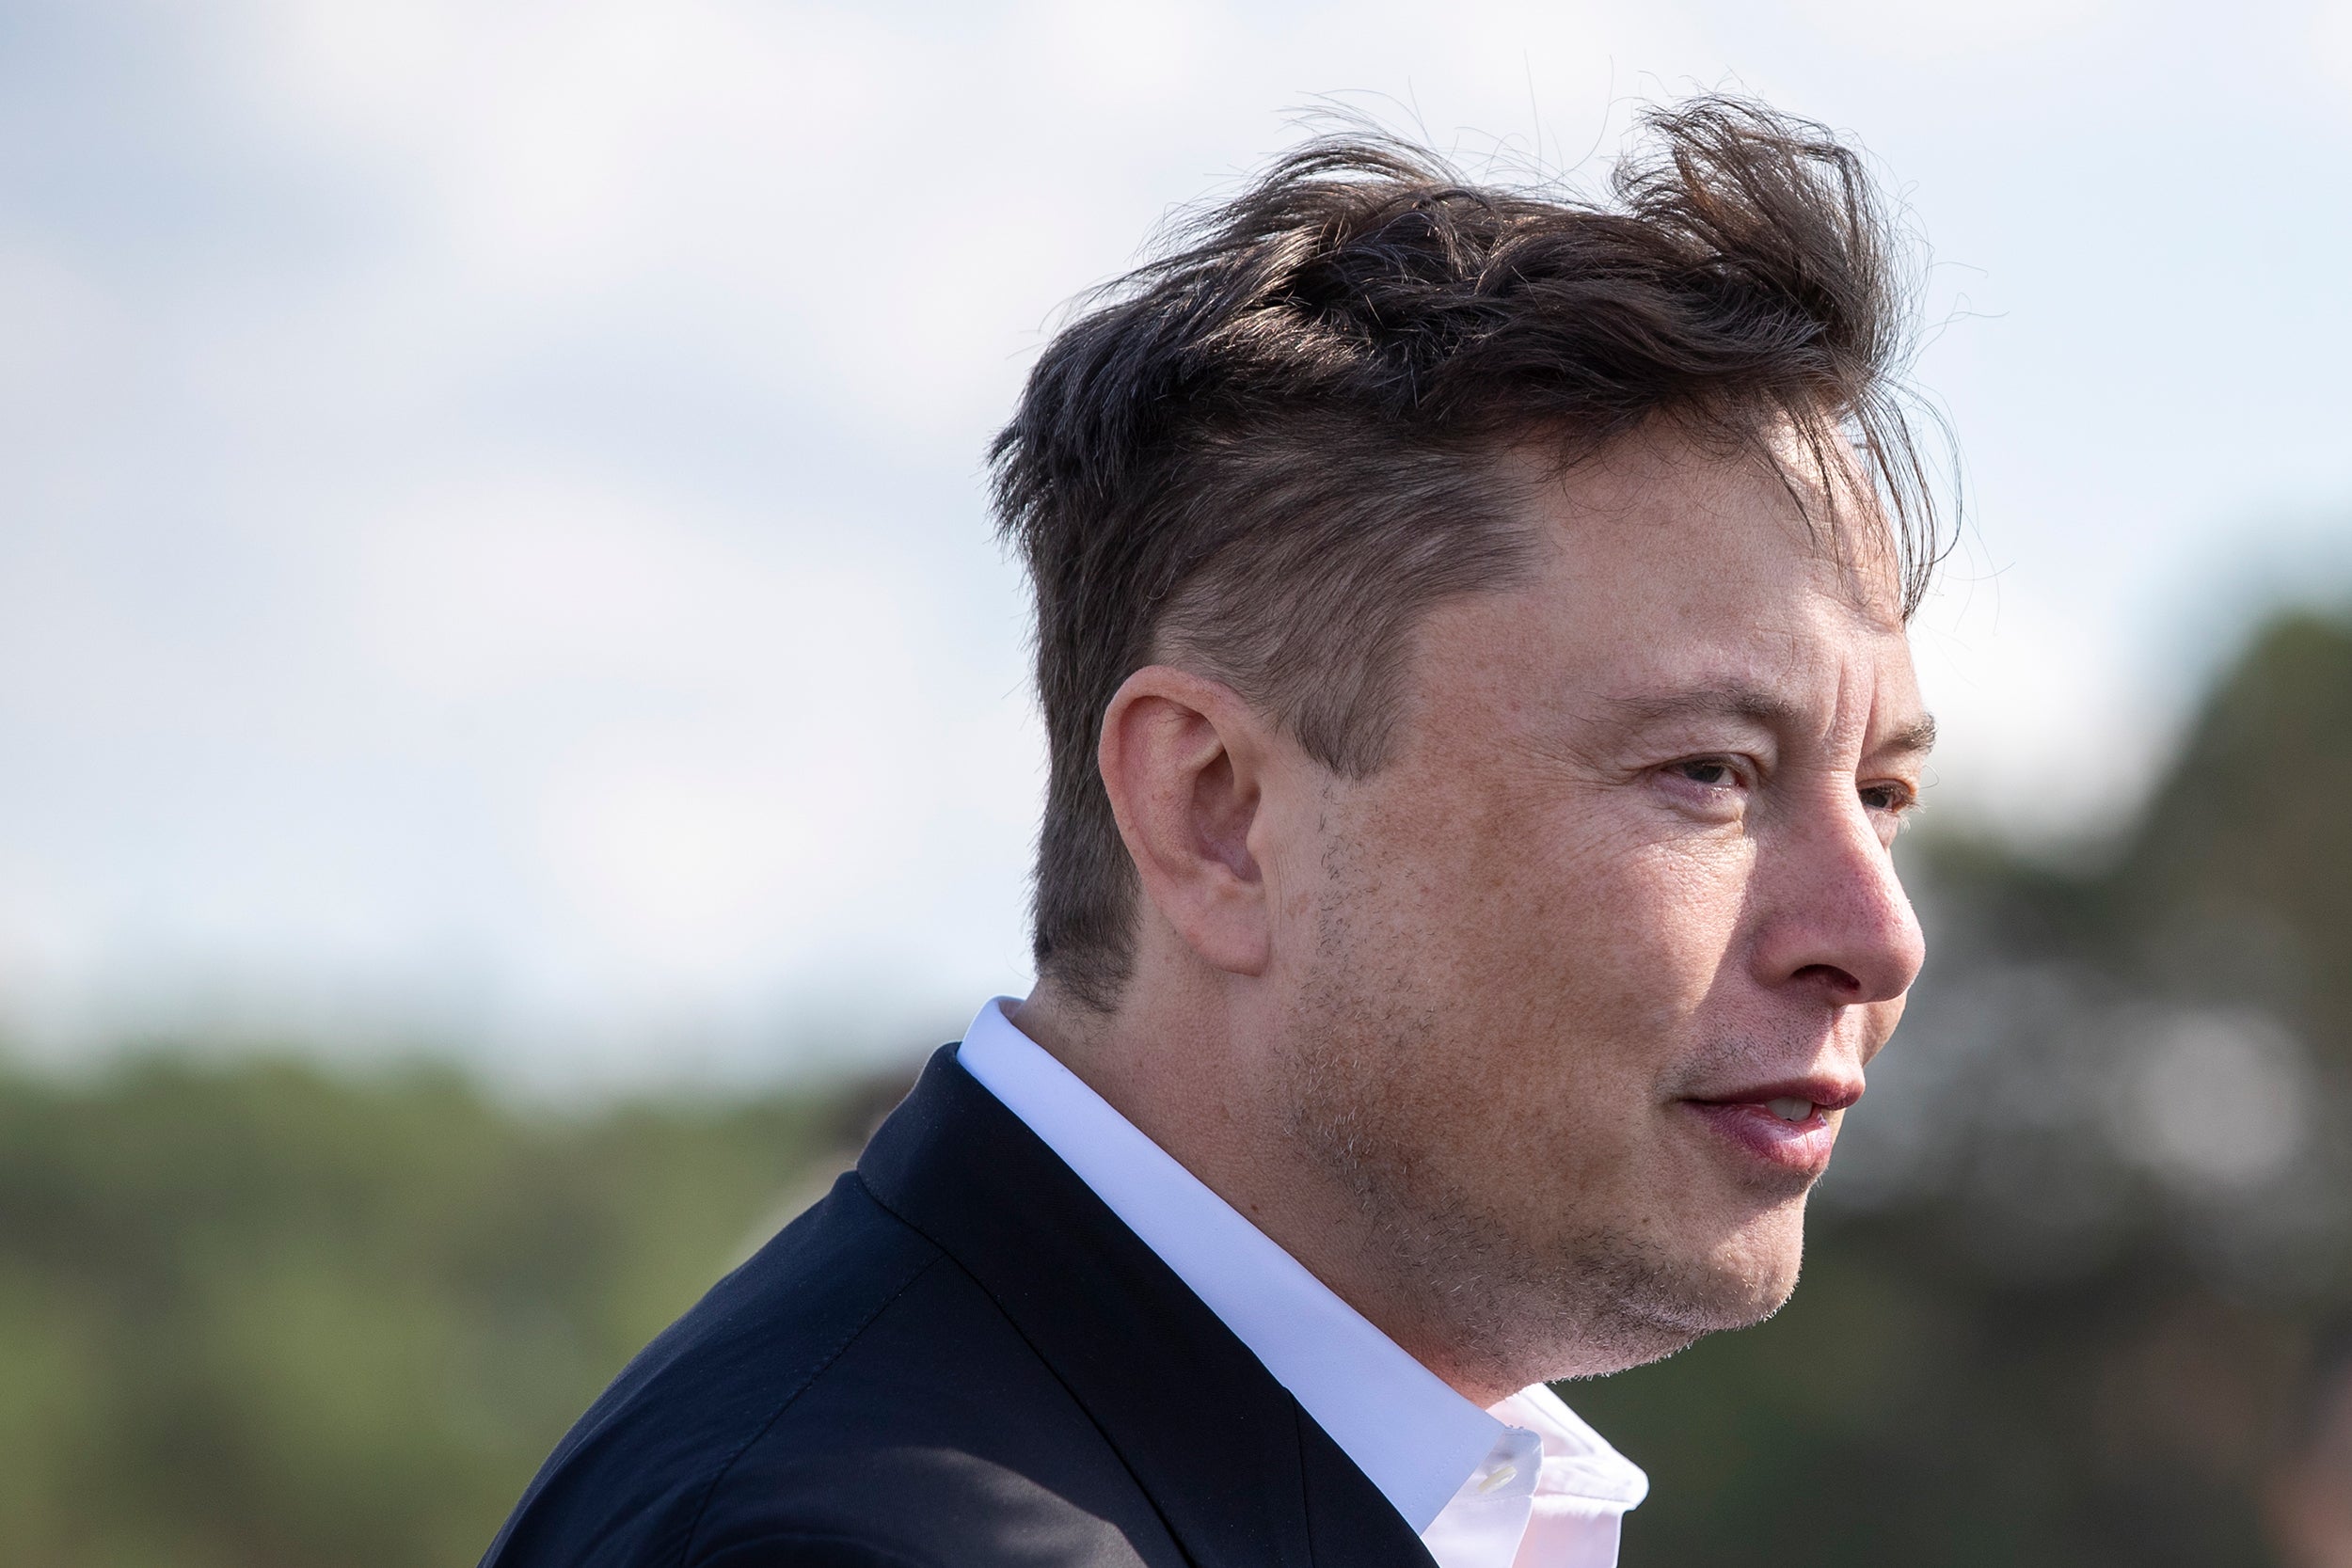 Tesla CEO Elon Musk on what he thinks is 'Game of Pennies' - Times of India